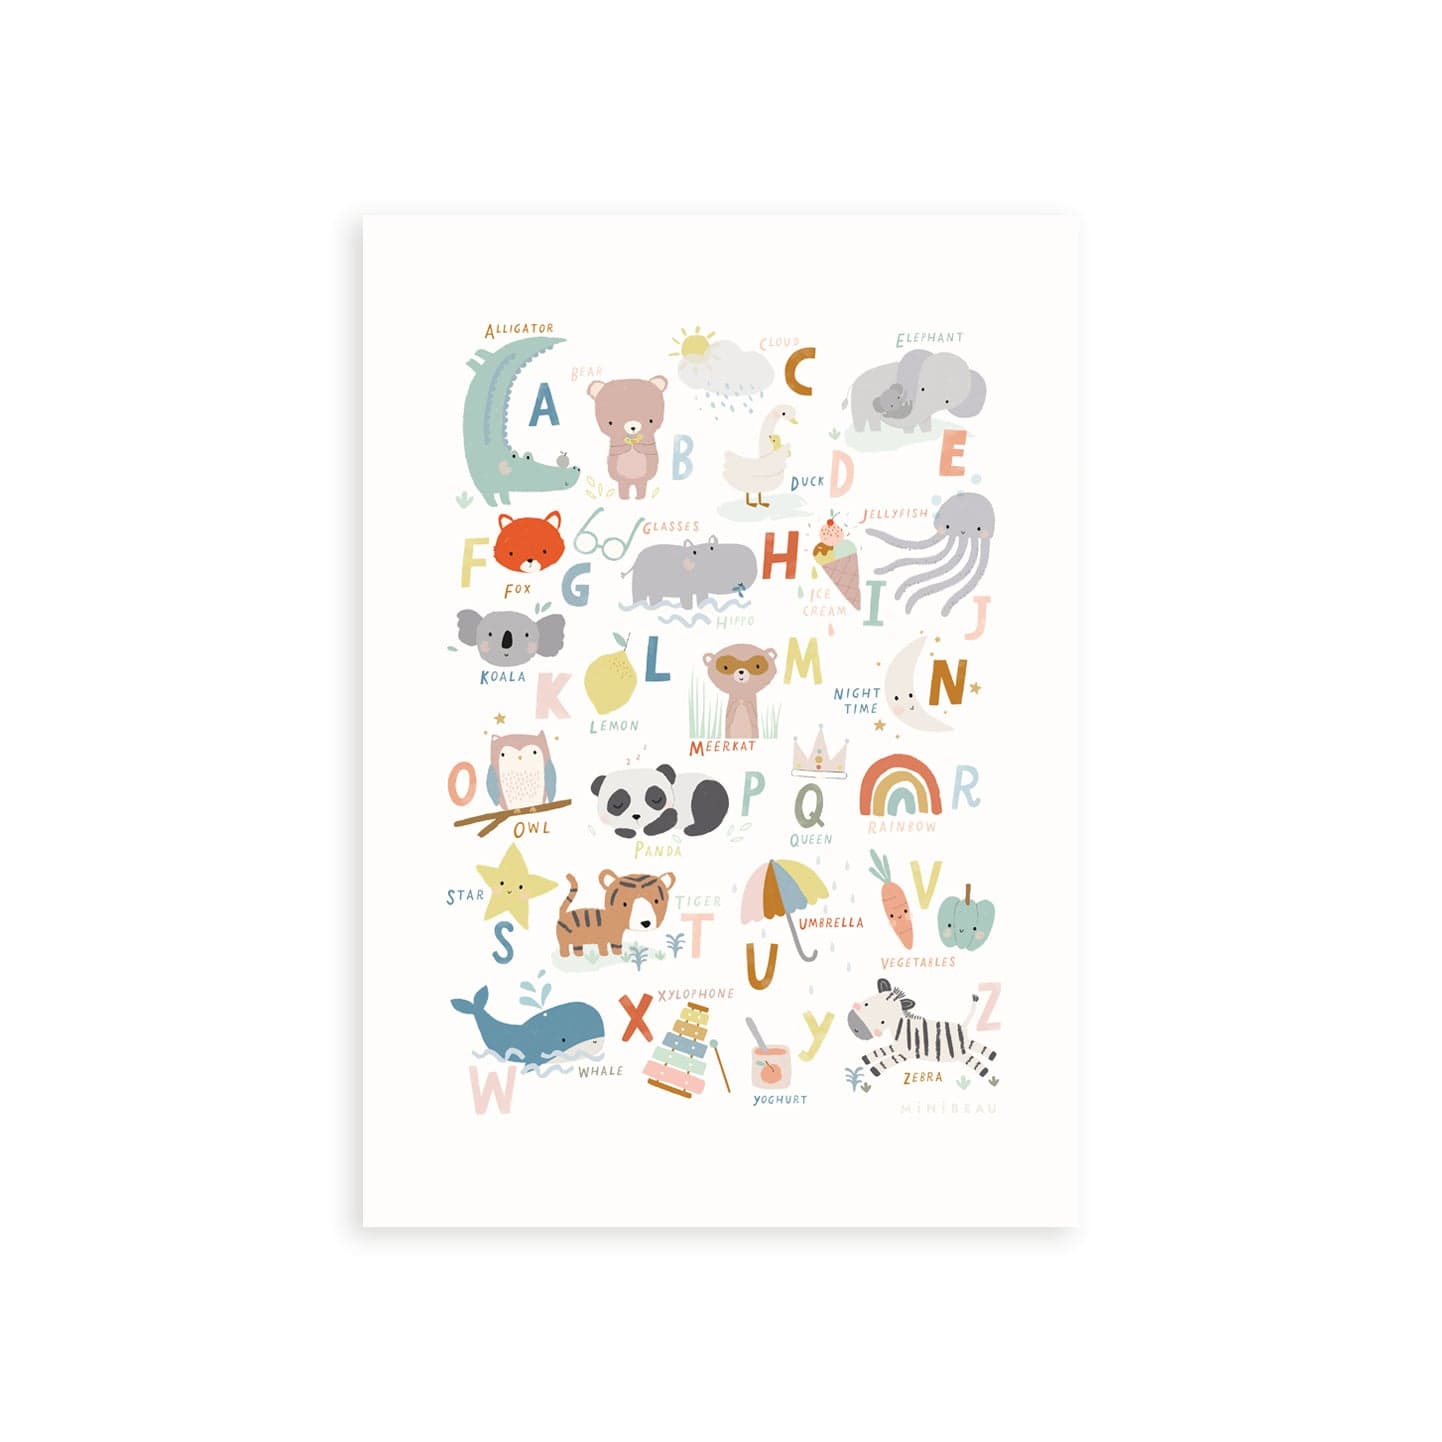 Our Cute animals Alphabet Art print features a variety cute animals and everyday items in soft tones, representing every letter of the alphabet. The print includes everything from a rainbow and elephant to a star and panda, all set against a clean white background.